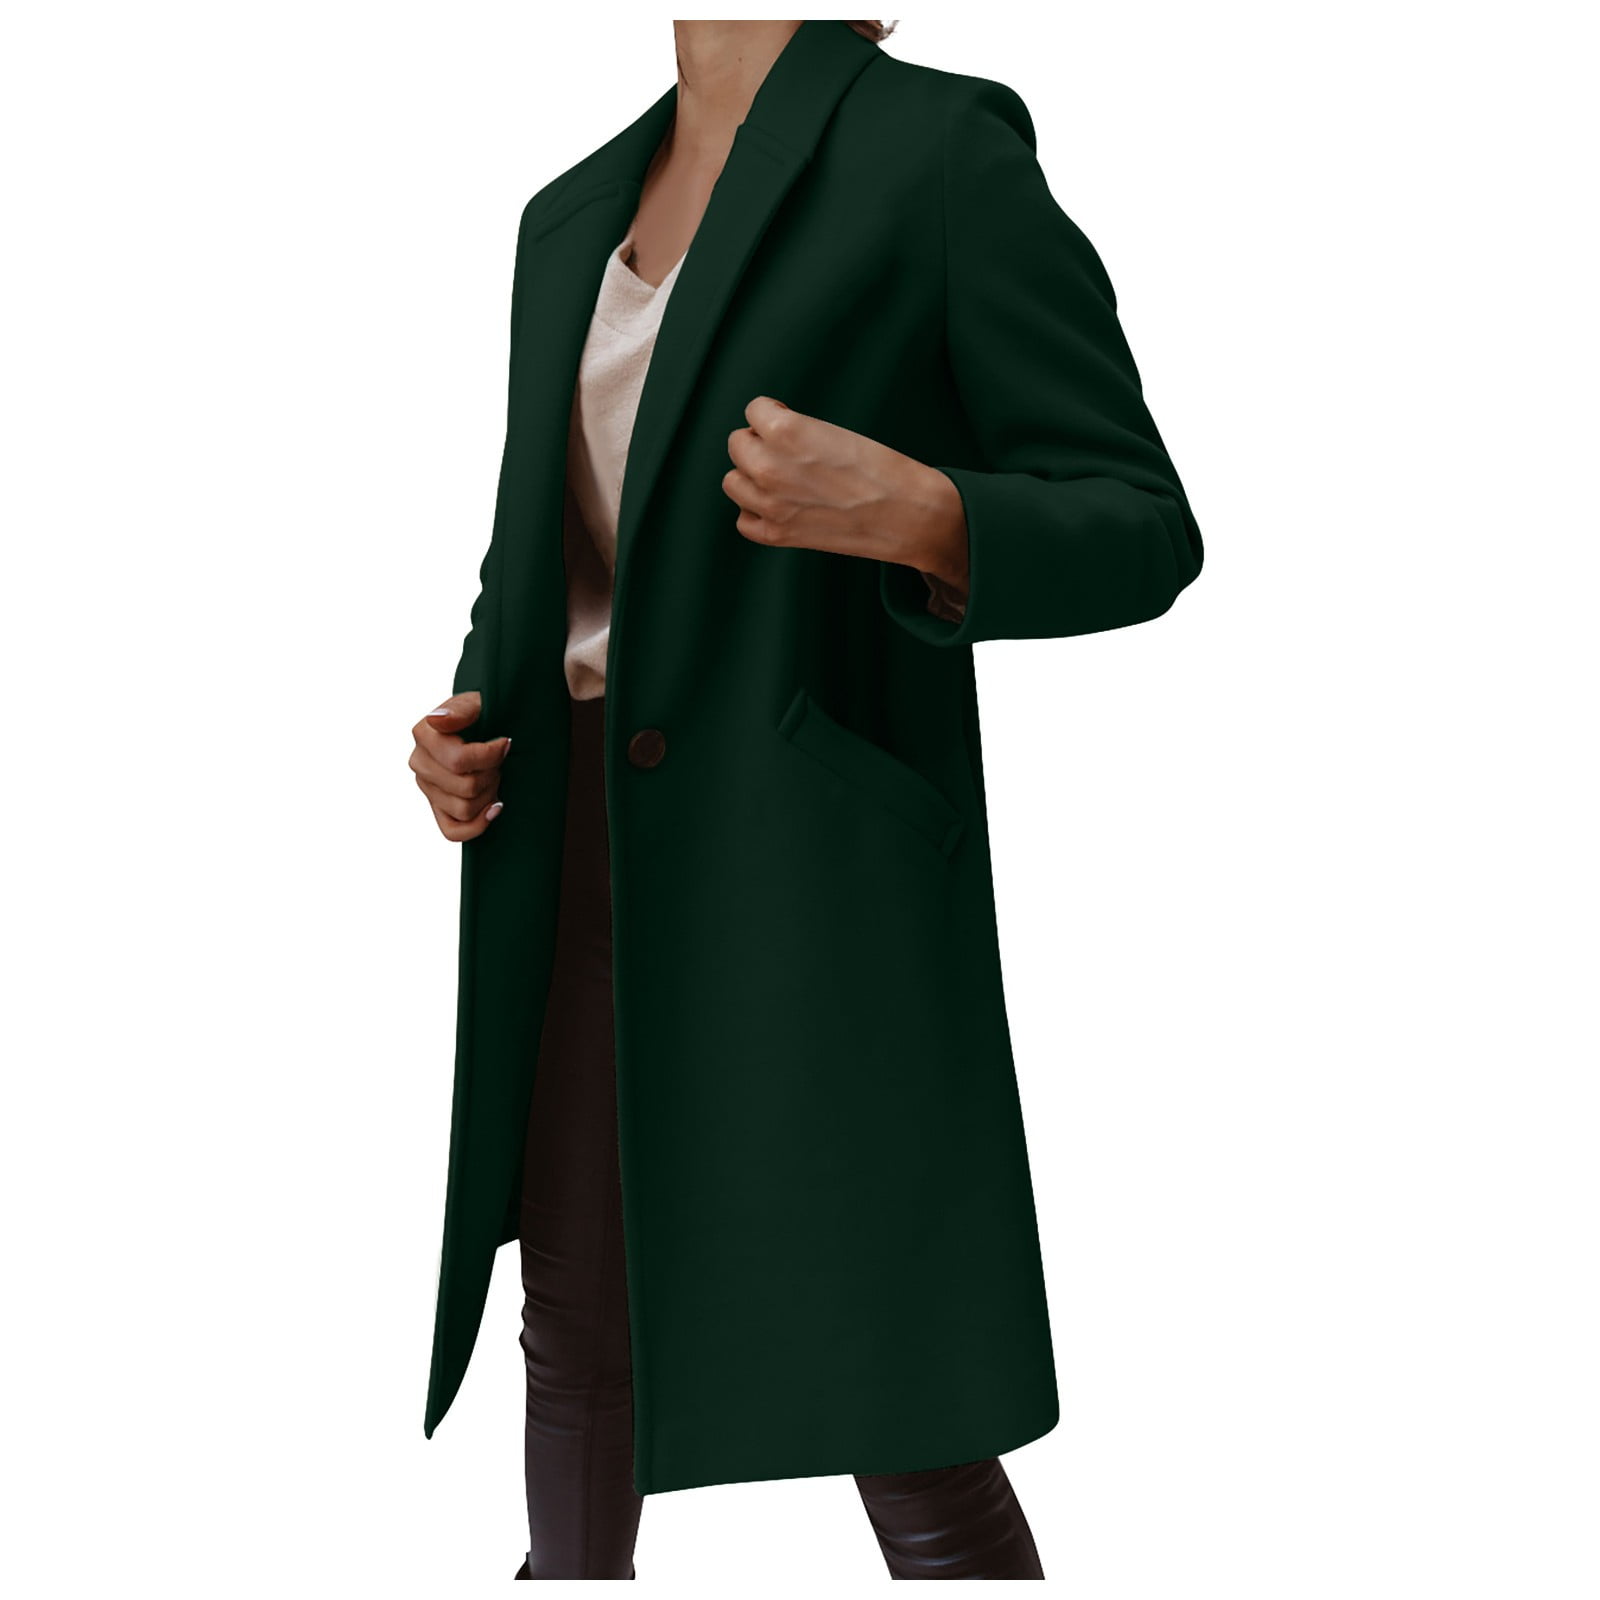 TKing Fashion Womens Cardigan Colid Color Long Sleeves Lapel Mid-length  Button Woolen Coat Cardigan Sweaters For Women Dark Green M